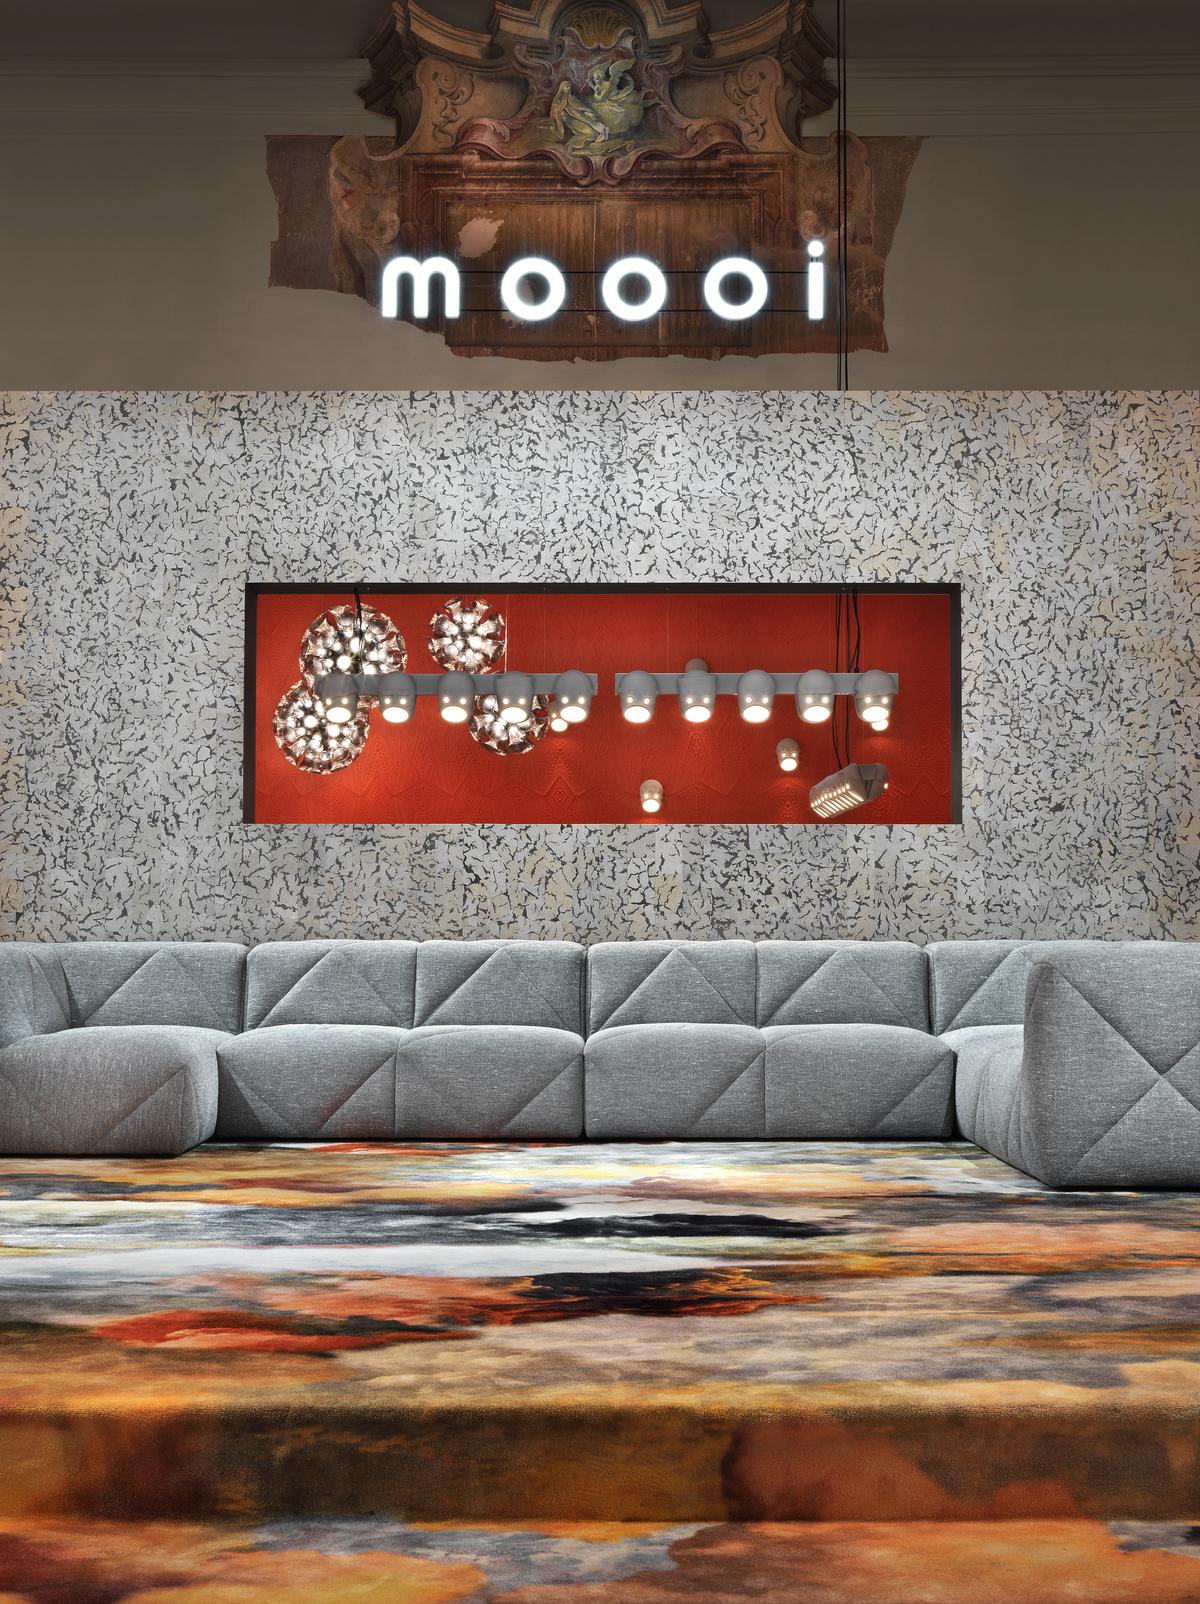 Moooi BFF Right Arm Chaise Longue Sofa in Vesper, Silver Upholstery In New Condition For Sale In Brooklyn, NY